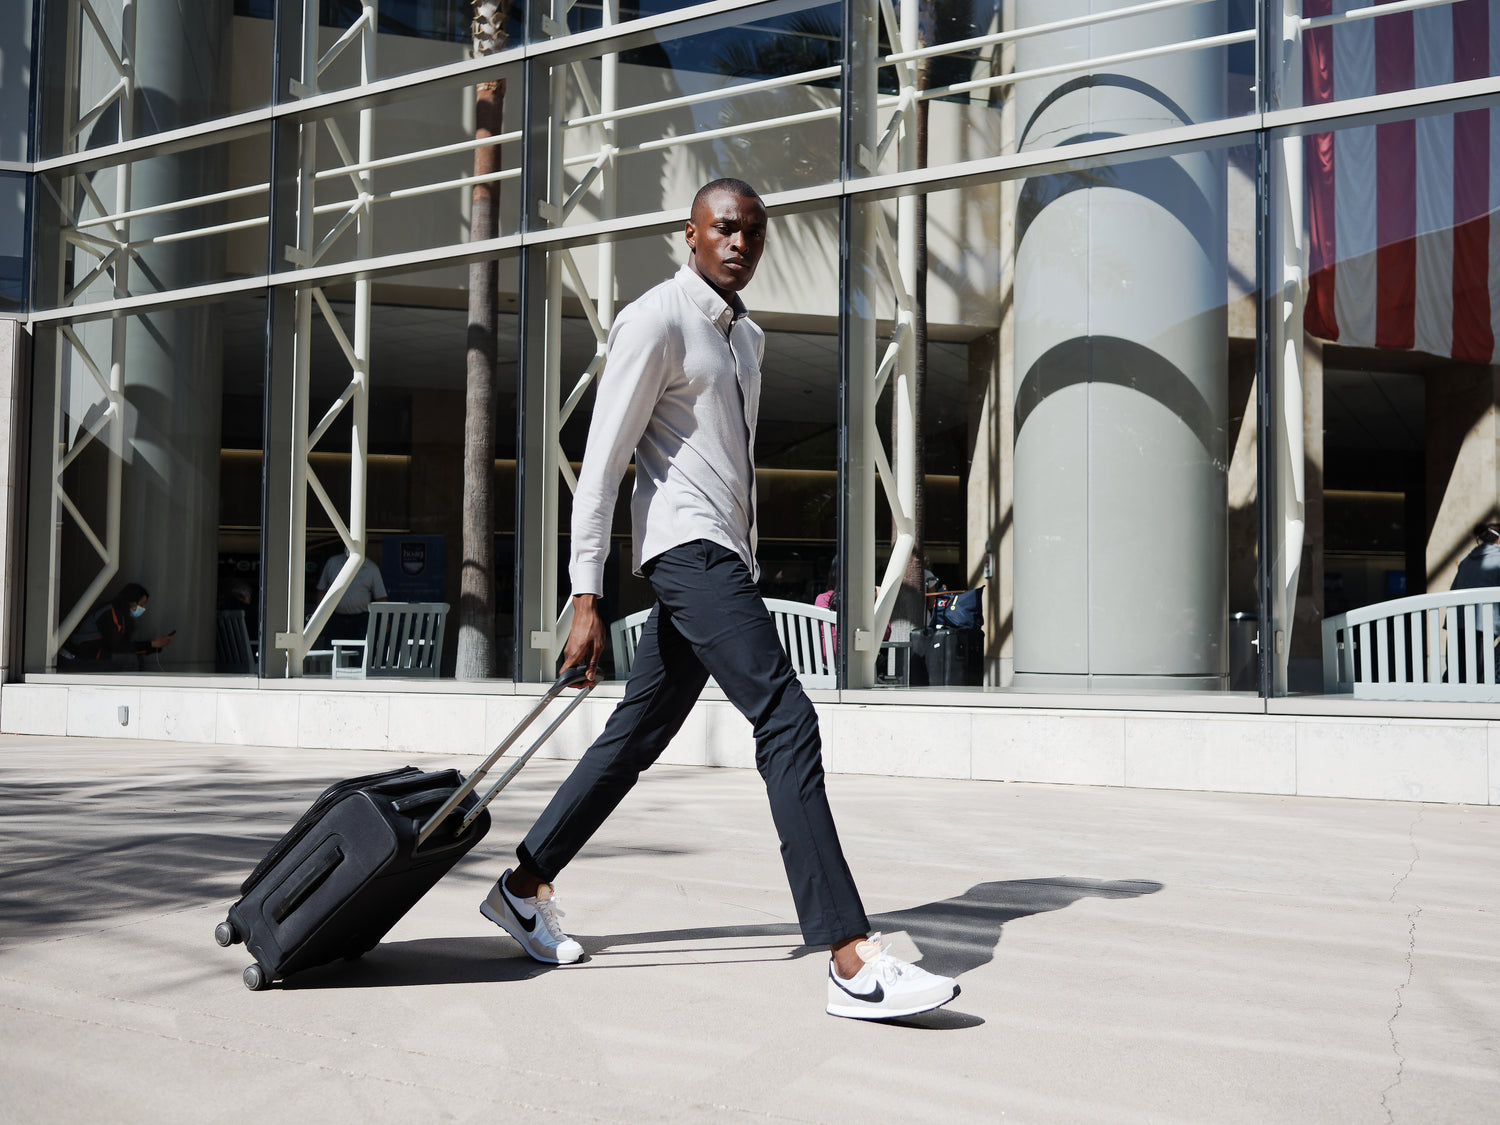 The Wrinkle-Free Travel Clothes You Need to Pack